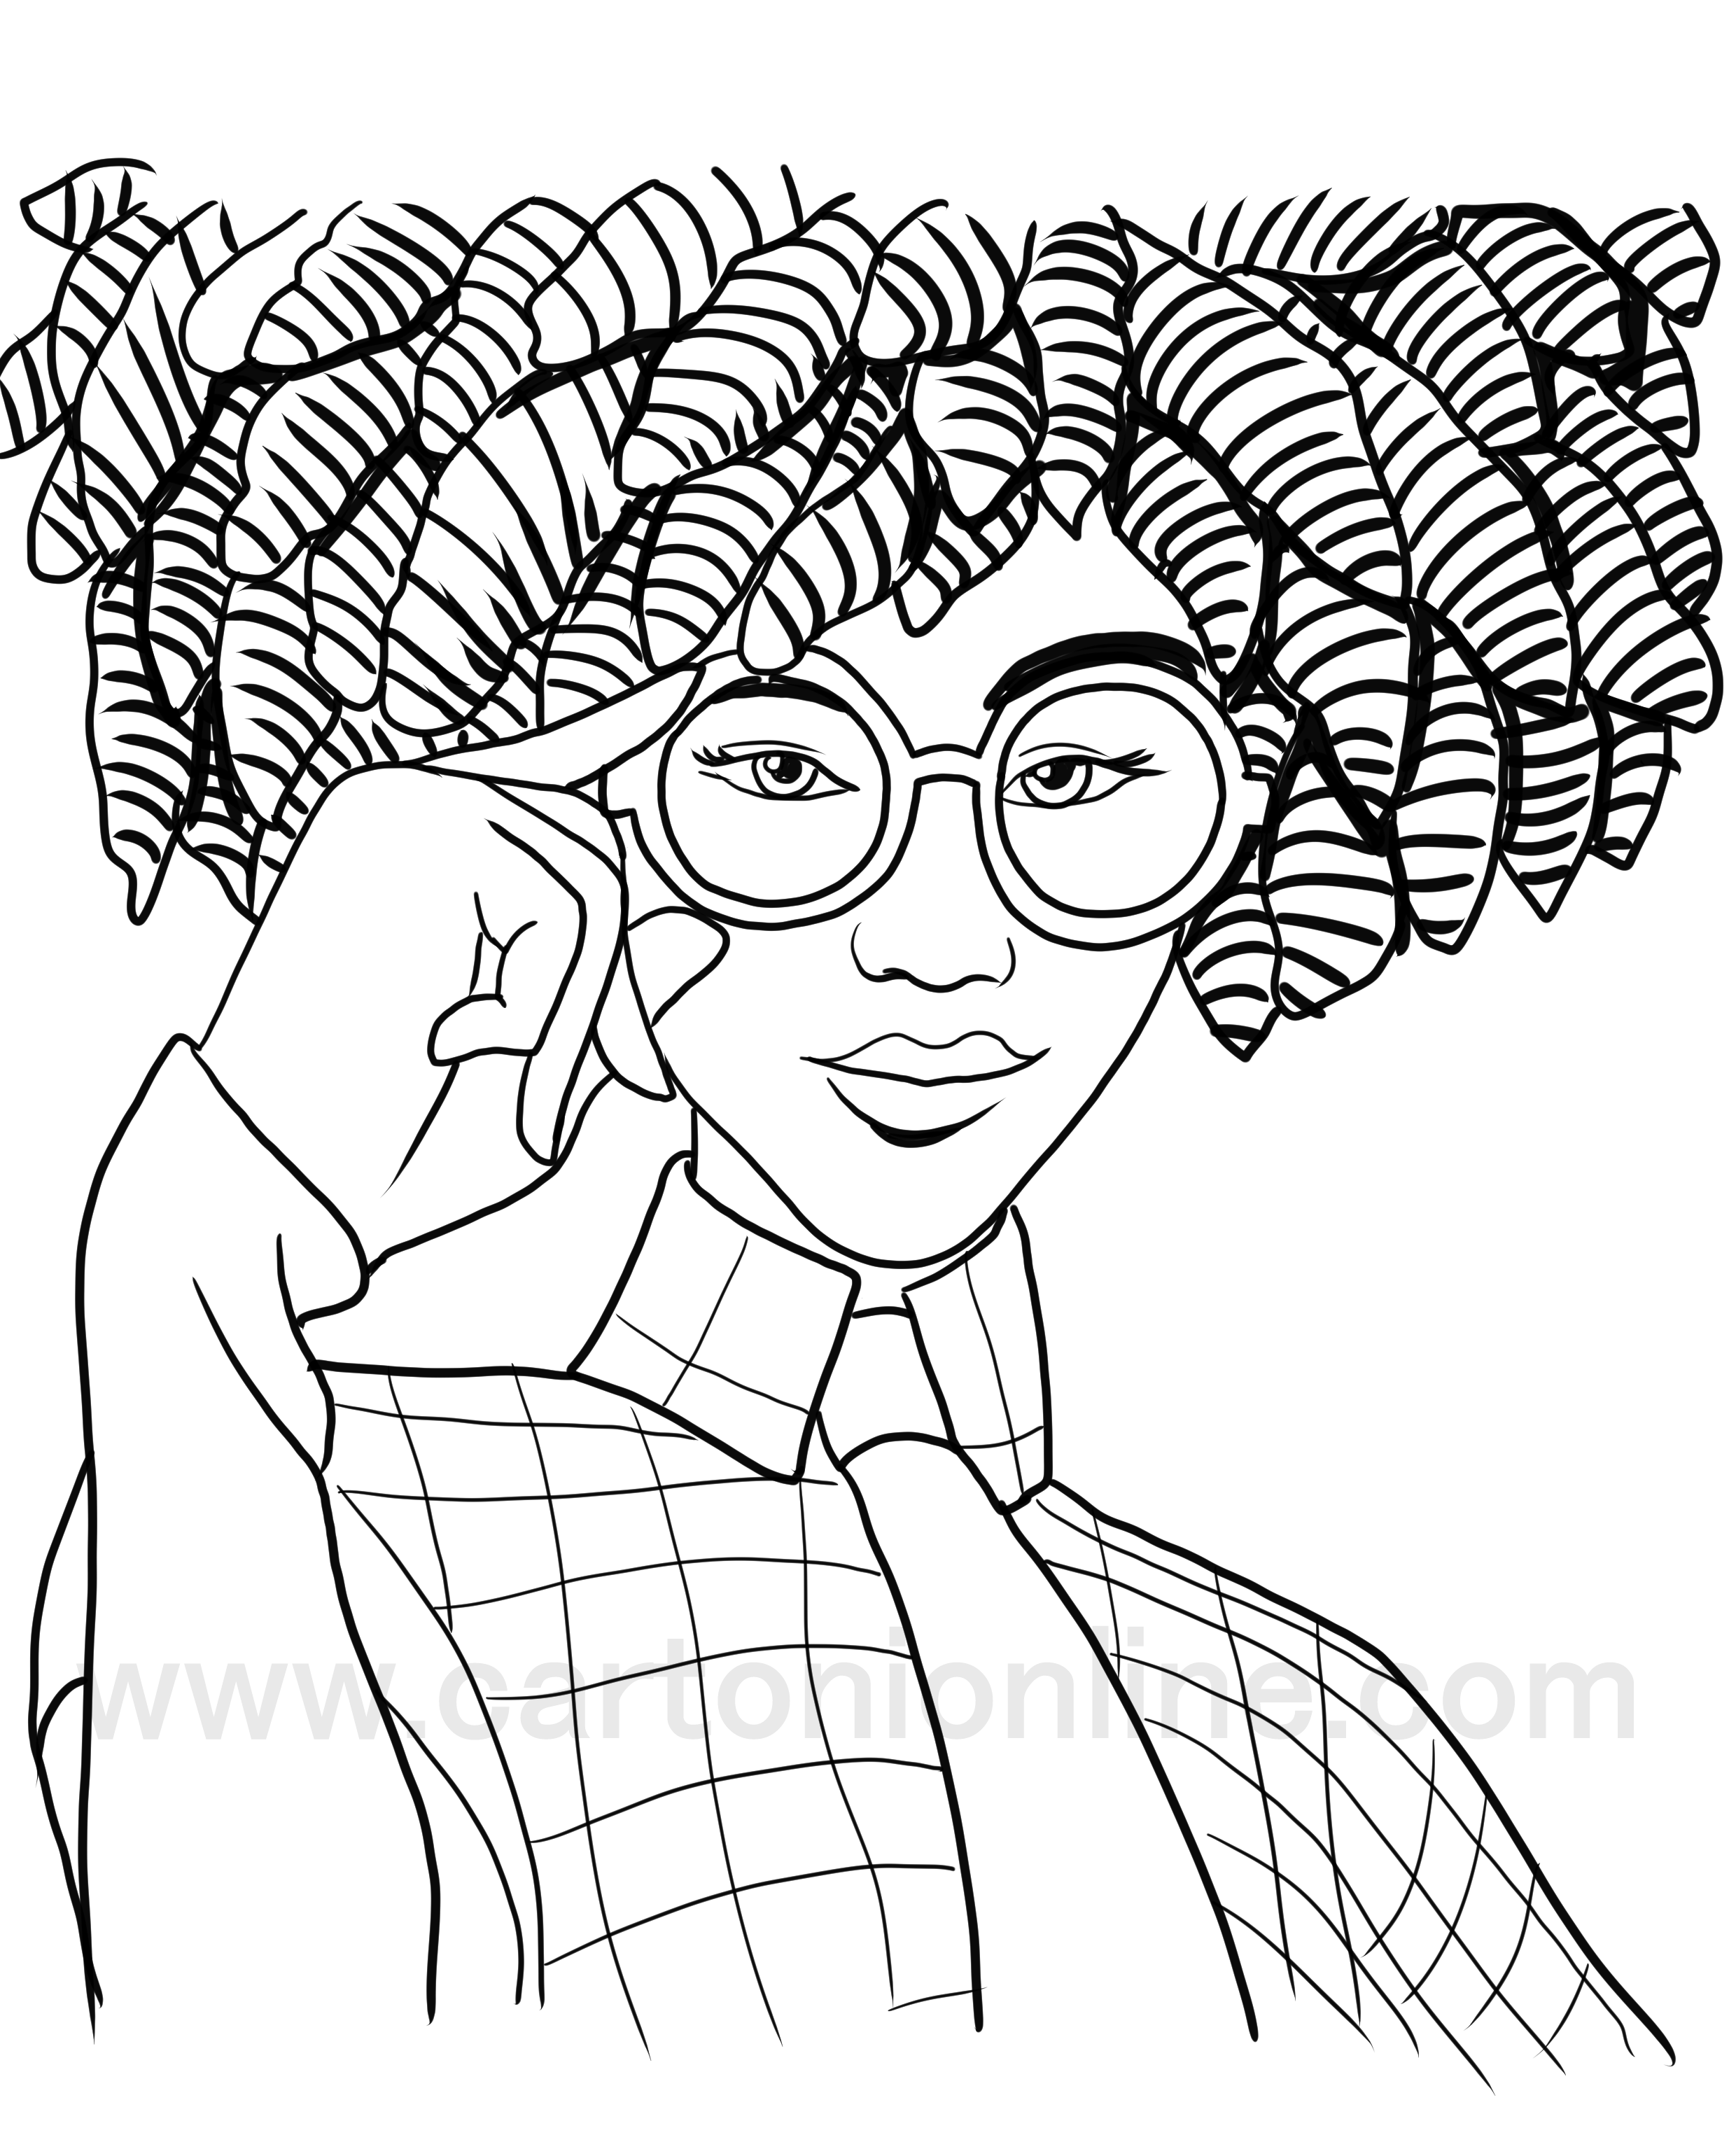 Doctor Slone from Fortnite coloring pages to print and coloring